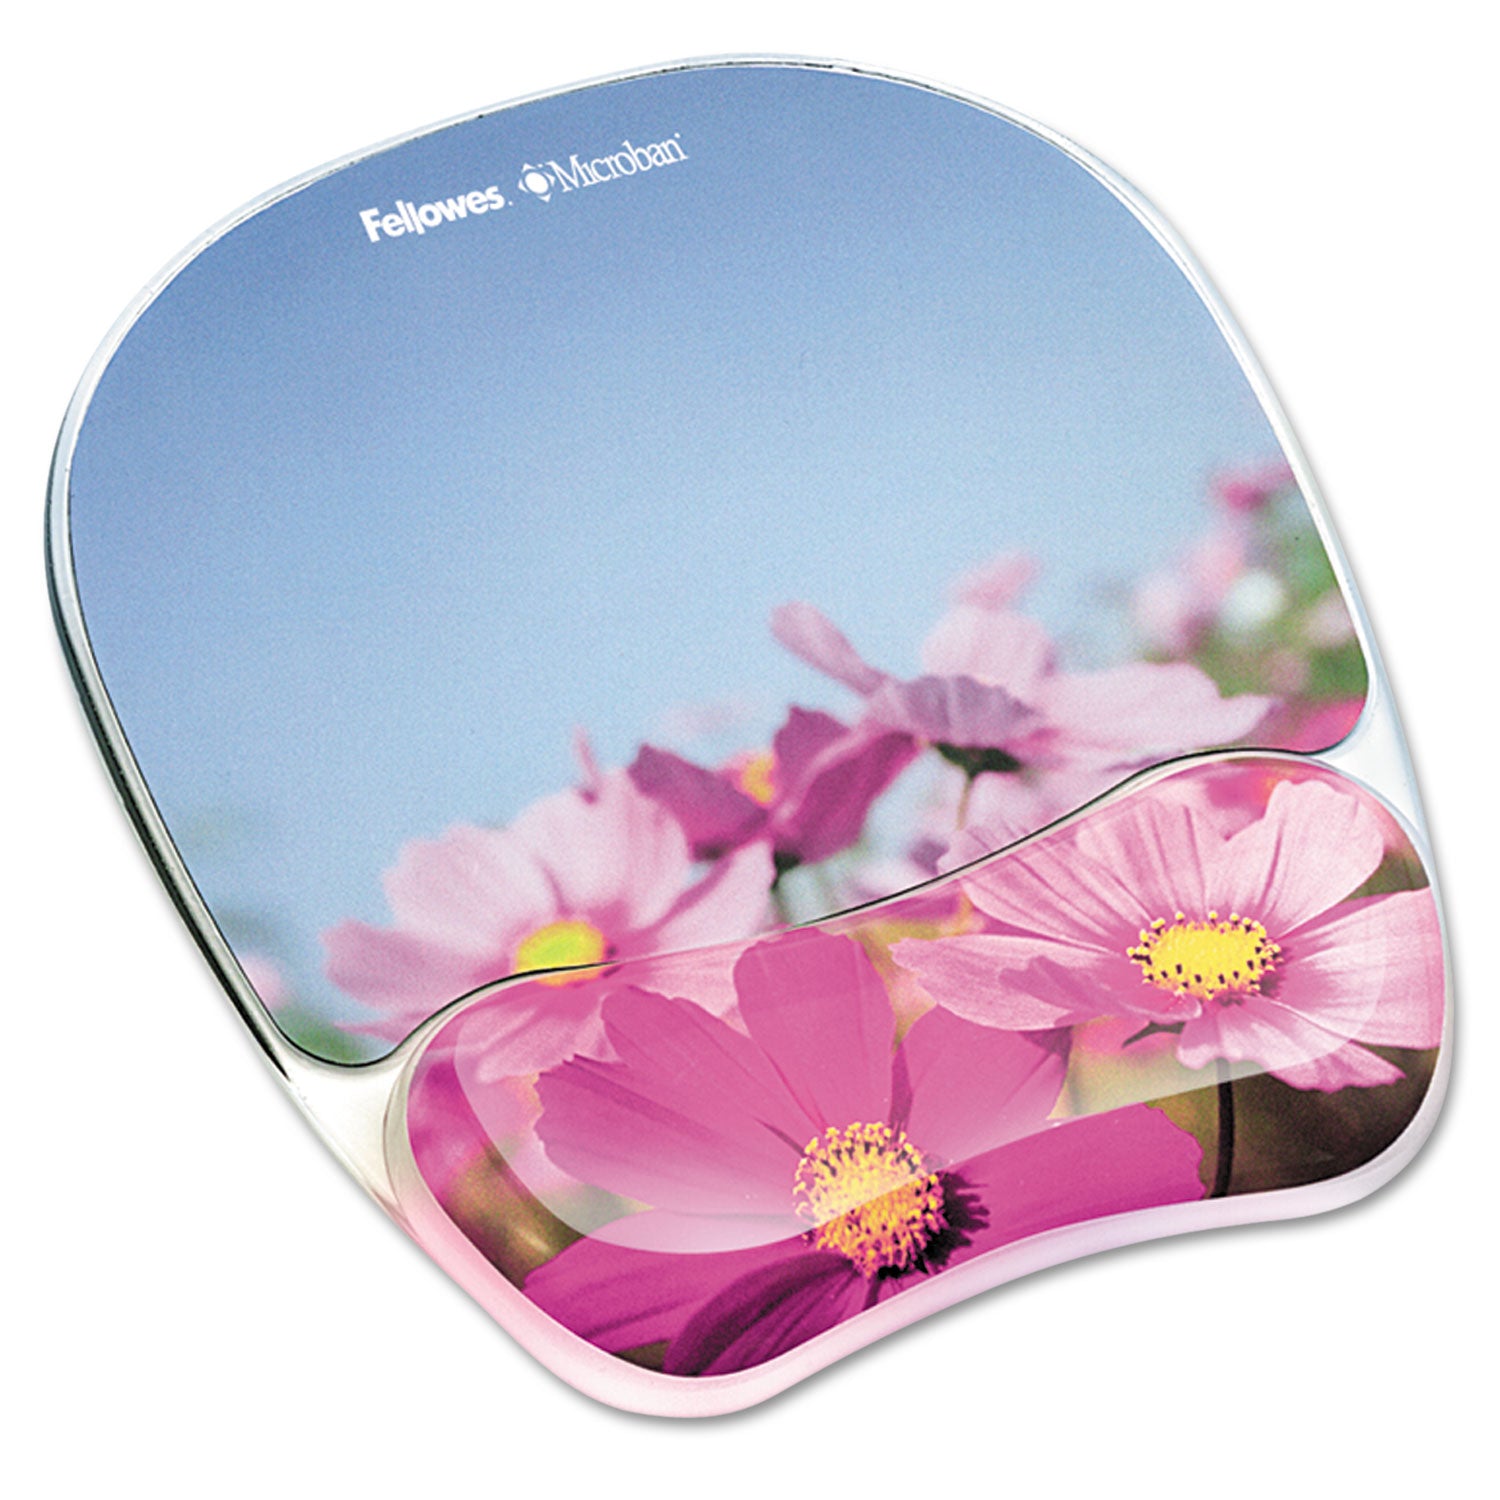 Photo Gel Mouse Pad with Wrist Rest with Microban Protection, 9.25 x 7.87, Pink Flowers Design - 